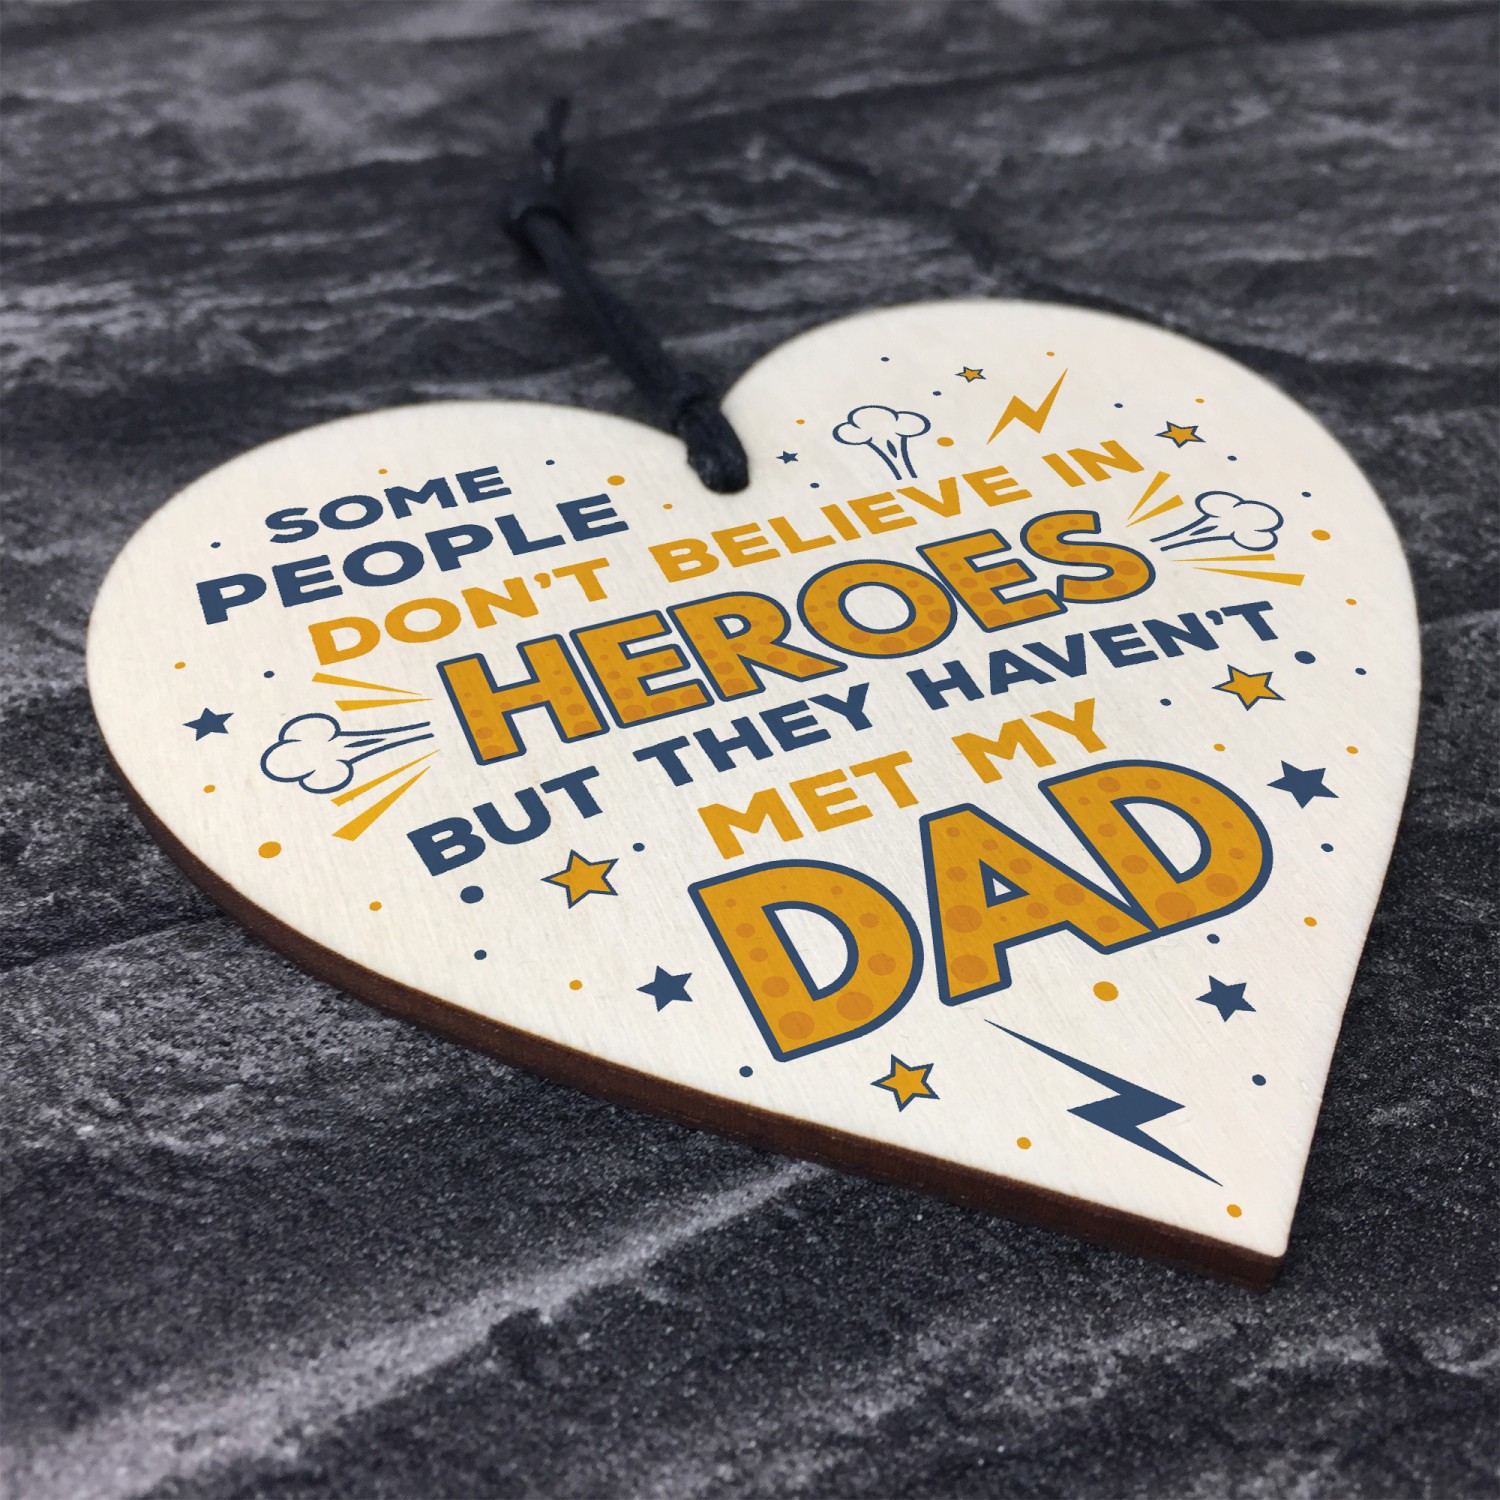 Superhero Father's Day Print - Father's Day Gift Idea from Kristen Duke |  Homemade fathers day gifts, Super hero dad, Great father's day gifts